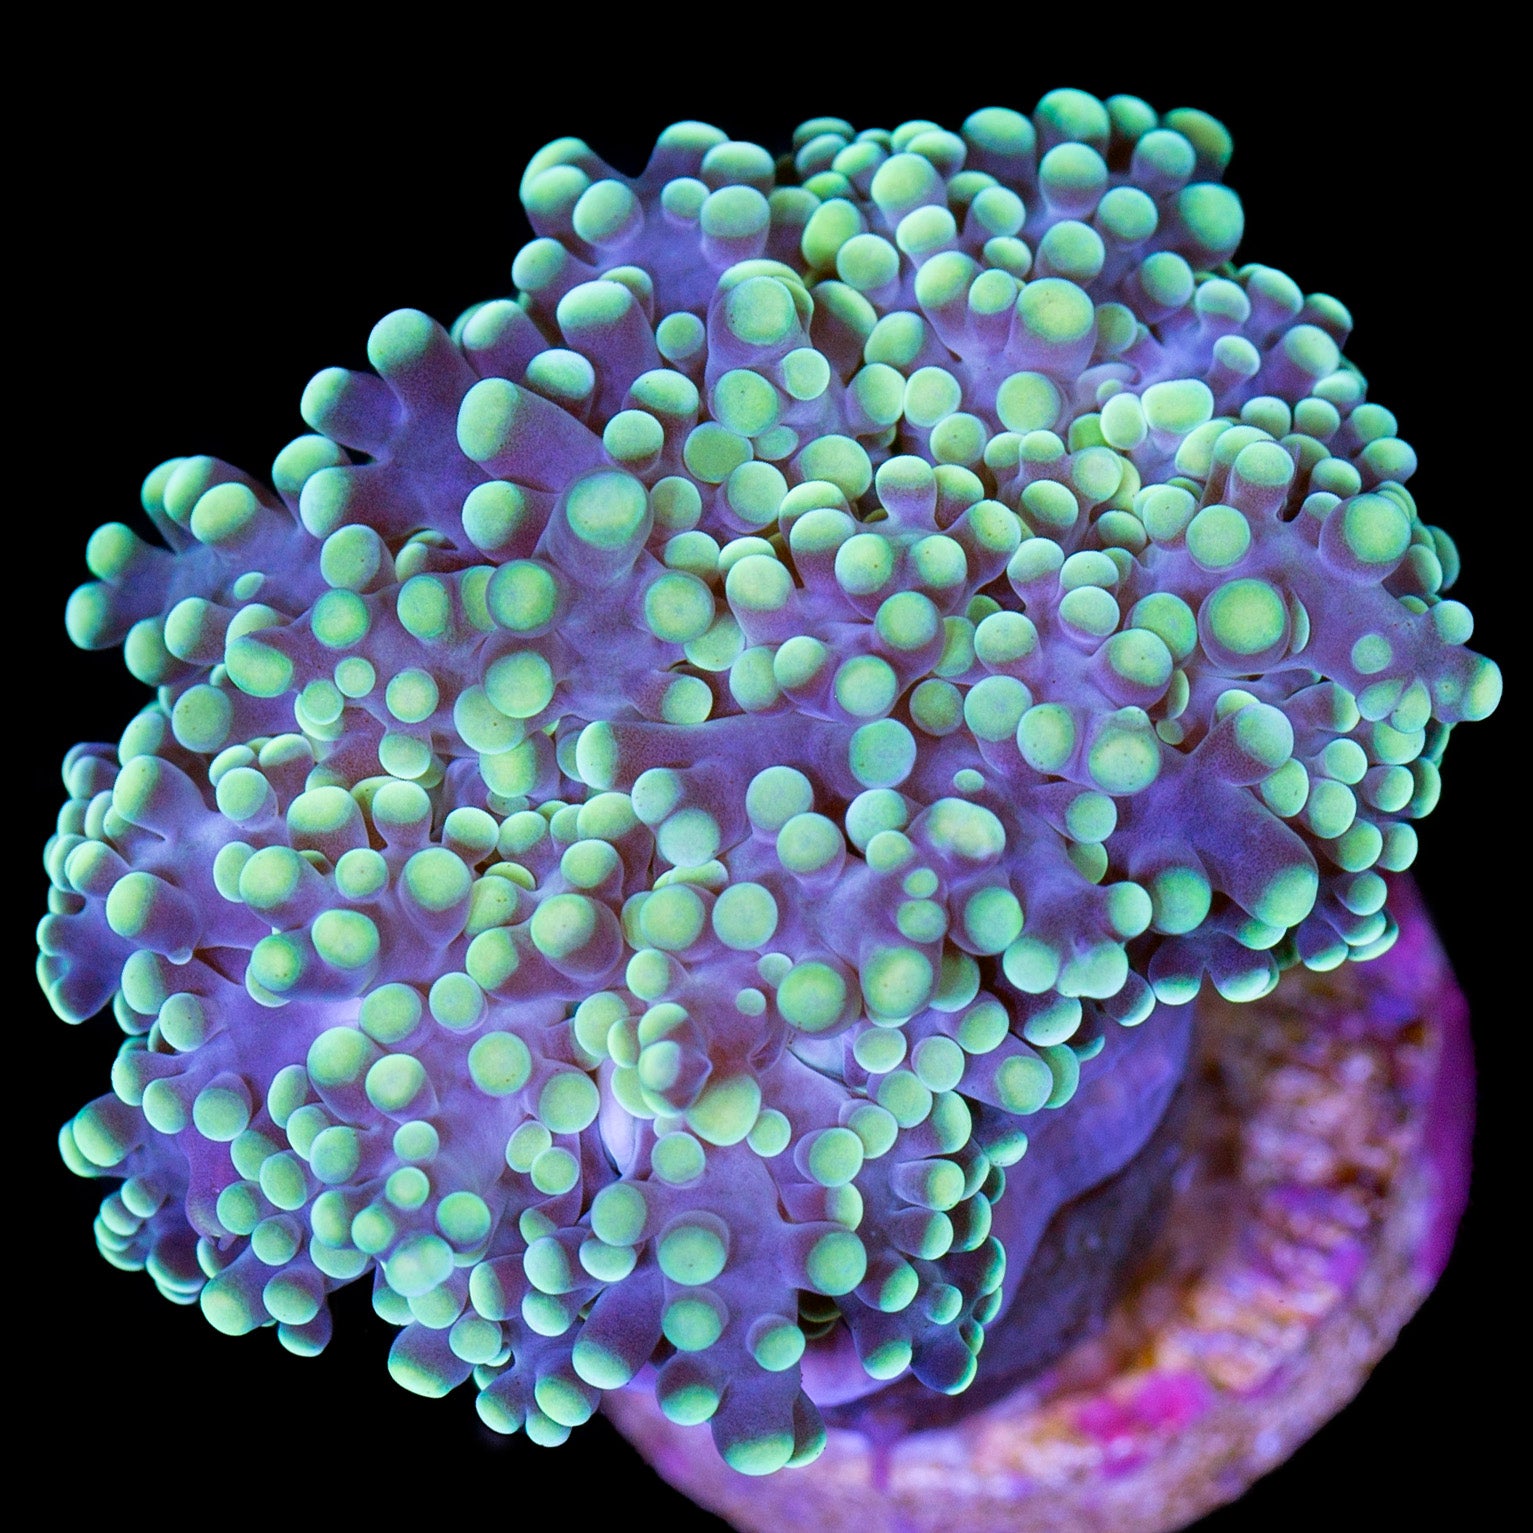 Neon Green Frogspawn Coral